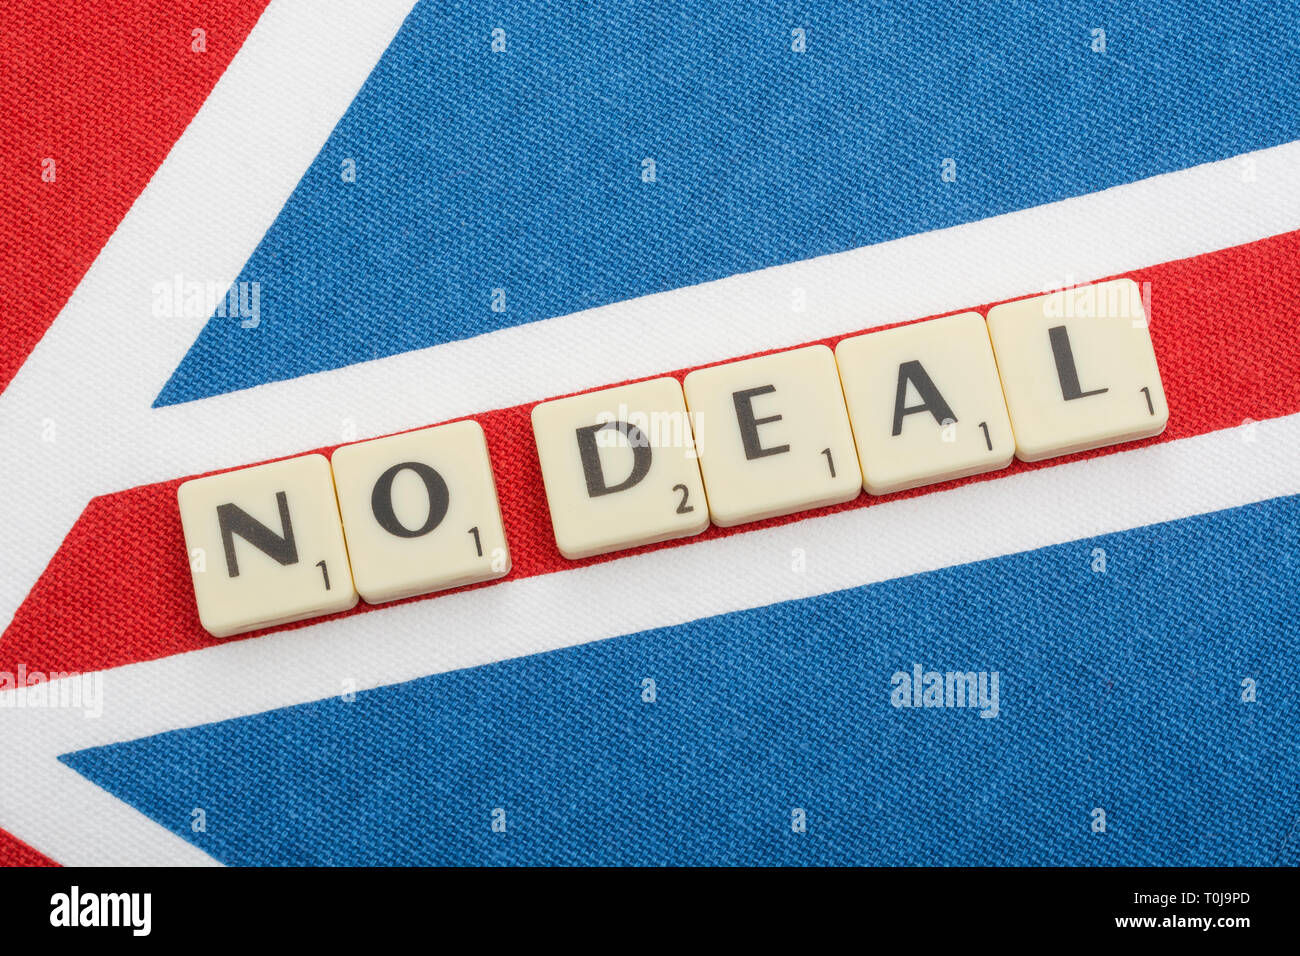 Union Jack & Brexit 'No Deal' motif in scrabble-style letters, in regard to staying or exiting EU, Cancel Brexit petition concept, No-Deal Brexit. Stock Photo